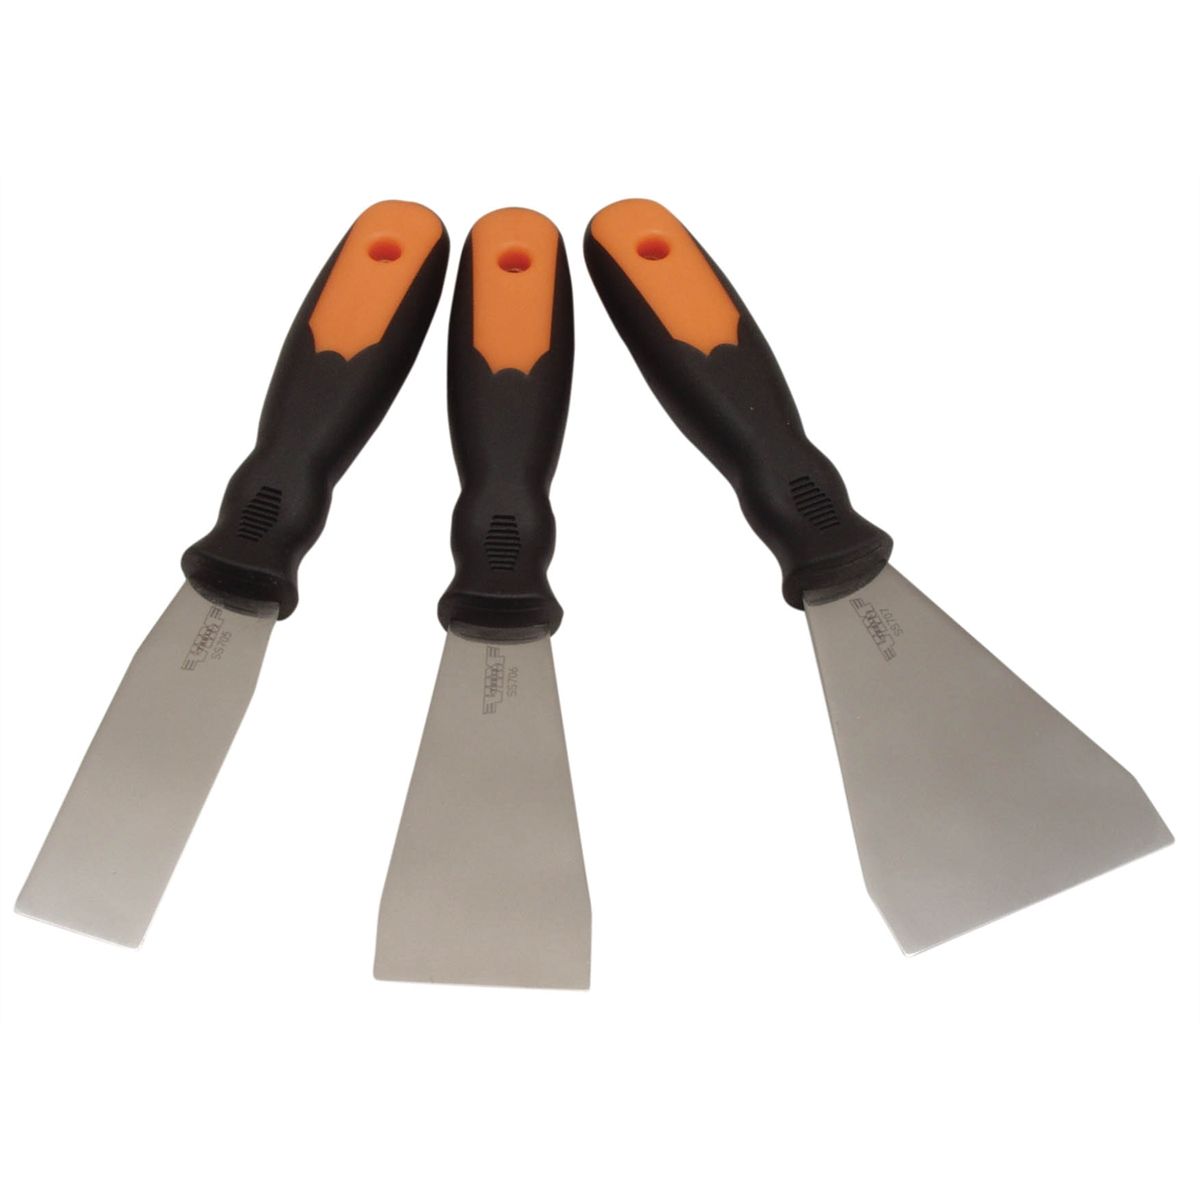 Vim Products 3 Piece Flexible Stainless Steel Putty Knife Set